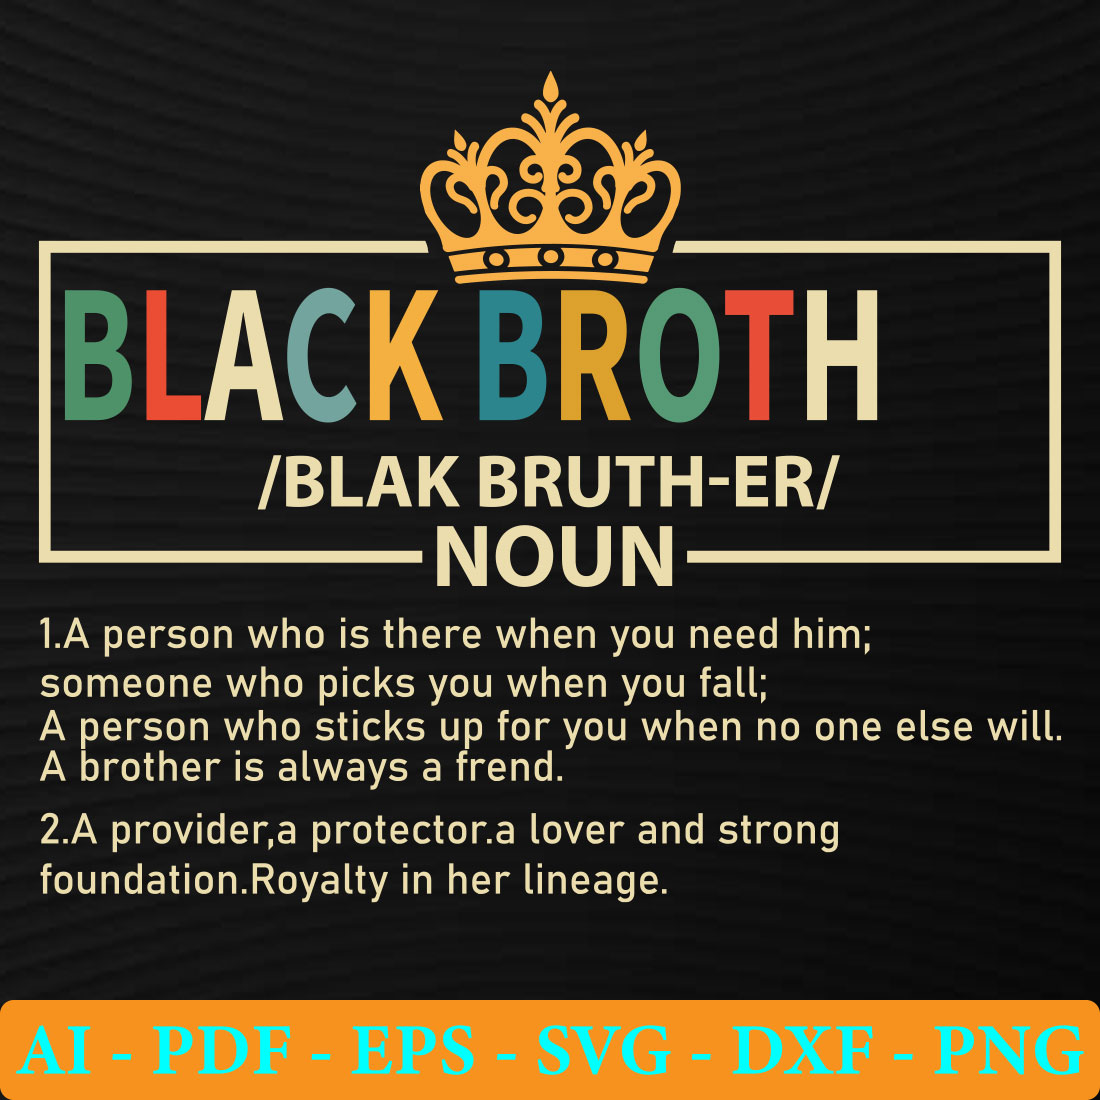 Black broth label with a crown on it.